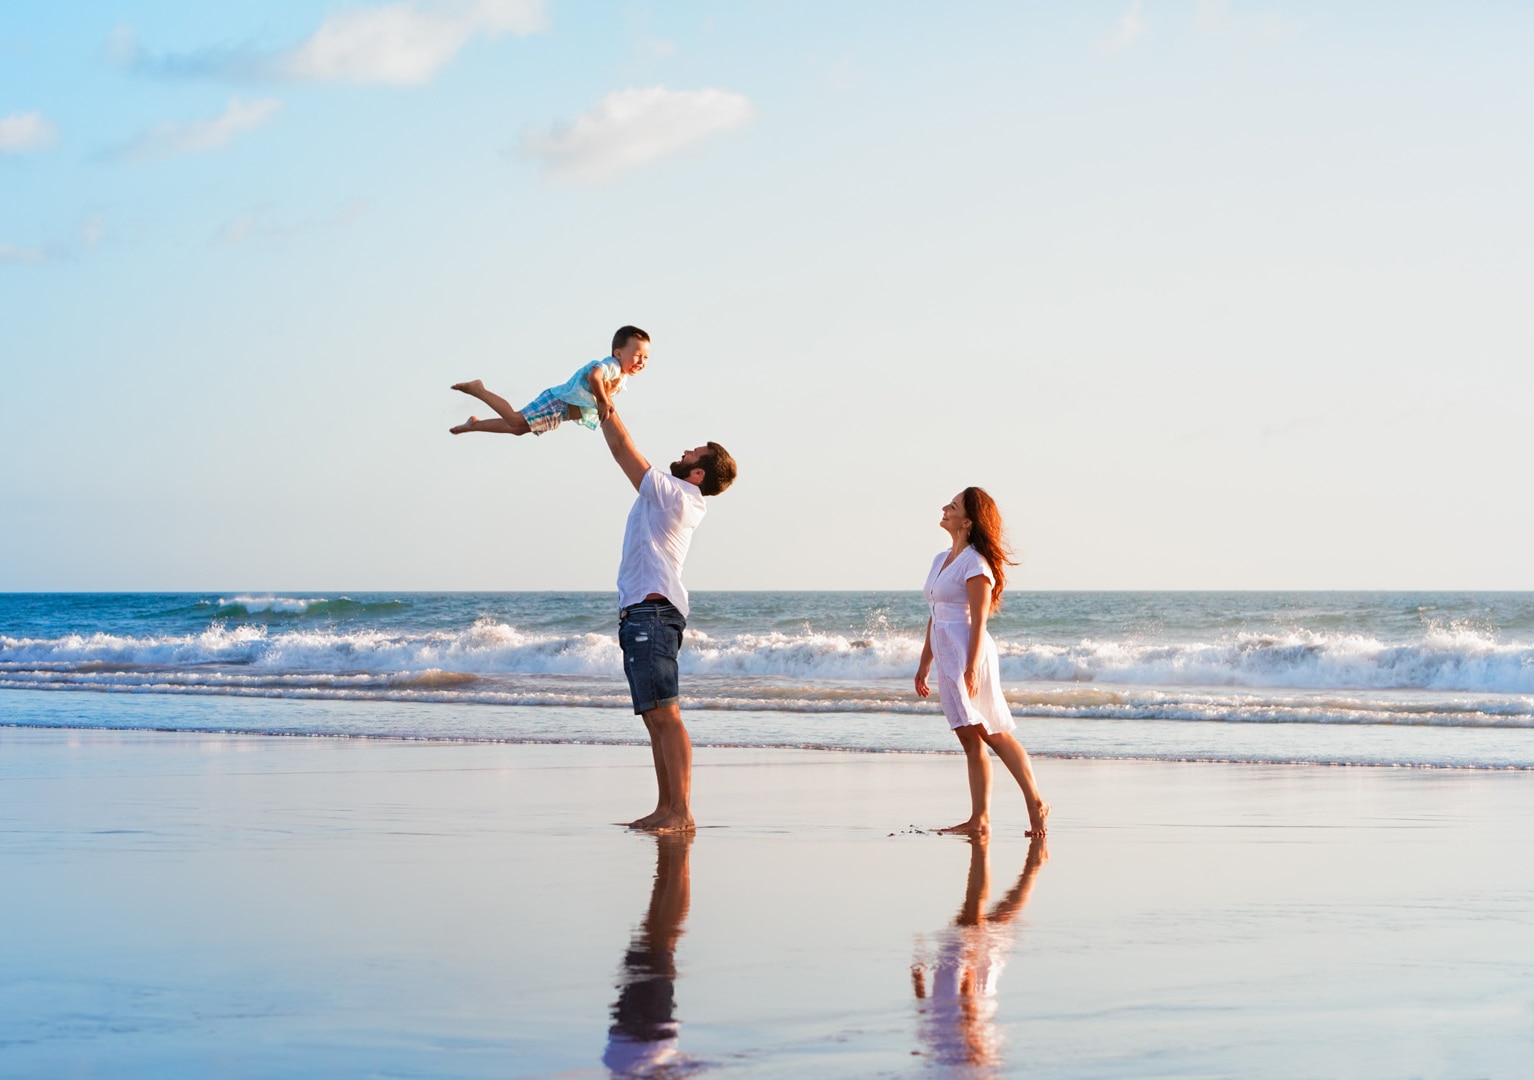 Happy family holidays. Joyful father, mother, baby son walk with fun along edge of sunset sea surf on black sand beach. Active parents and people outdoor activity on summer vacations with children.; Shutterstock ID 717546631; purchase_order: -; job: -; client: -; other: -